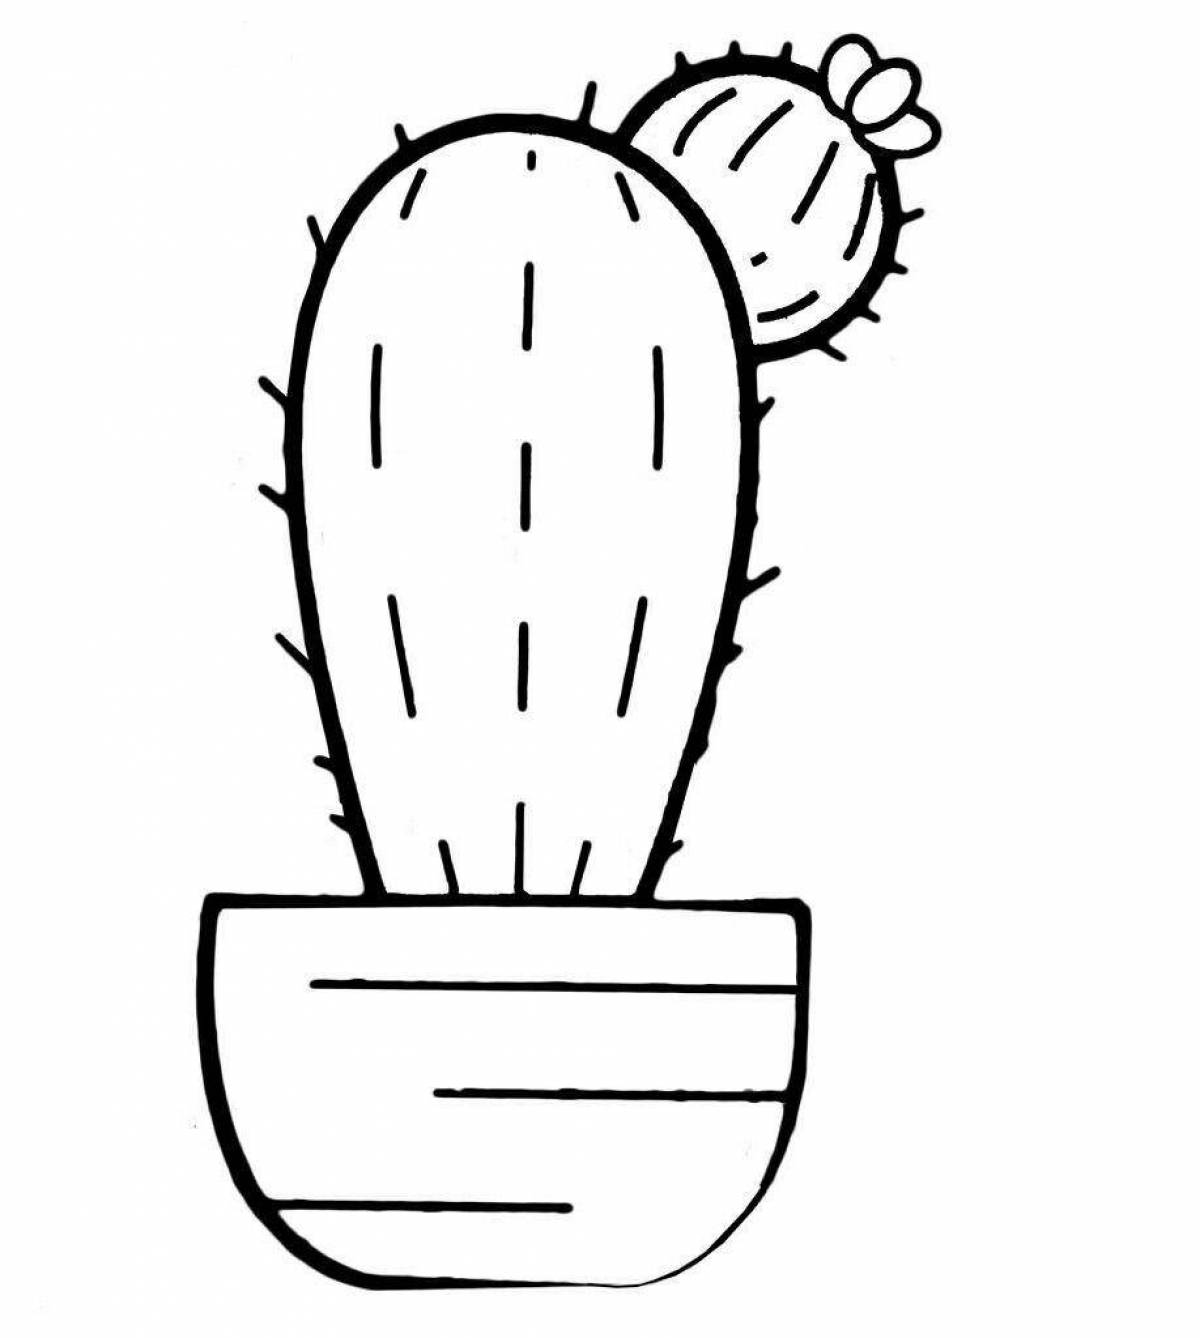 Funny cactus in a pot for children